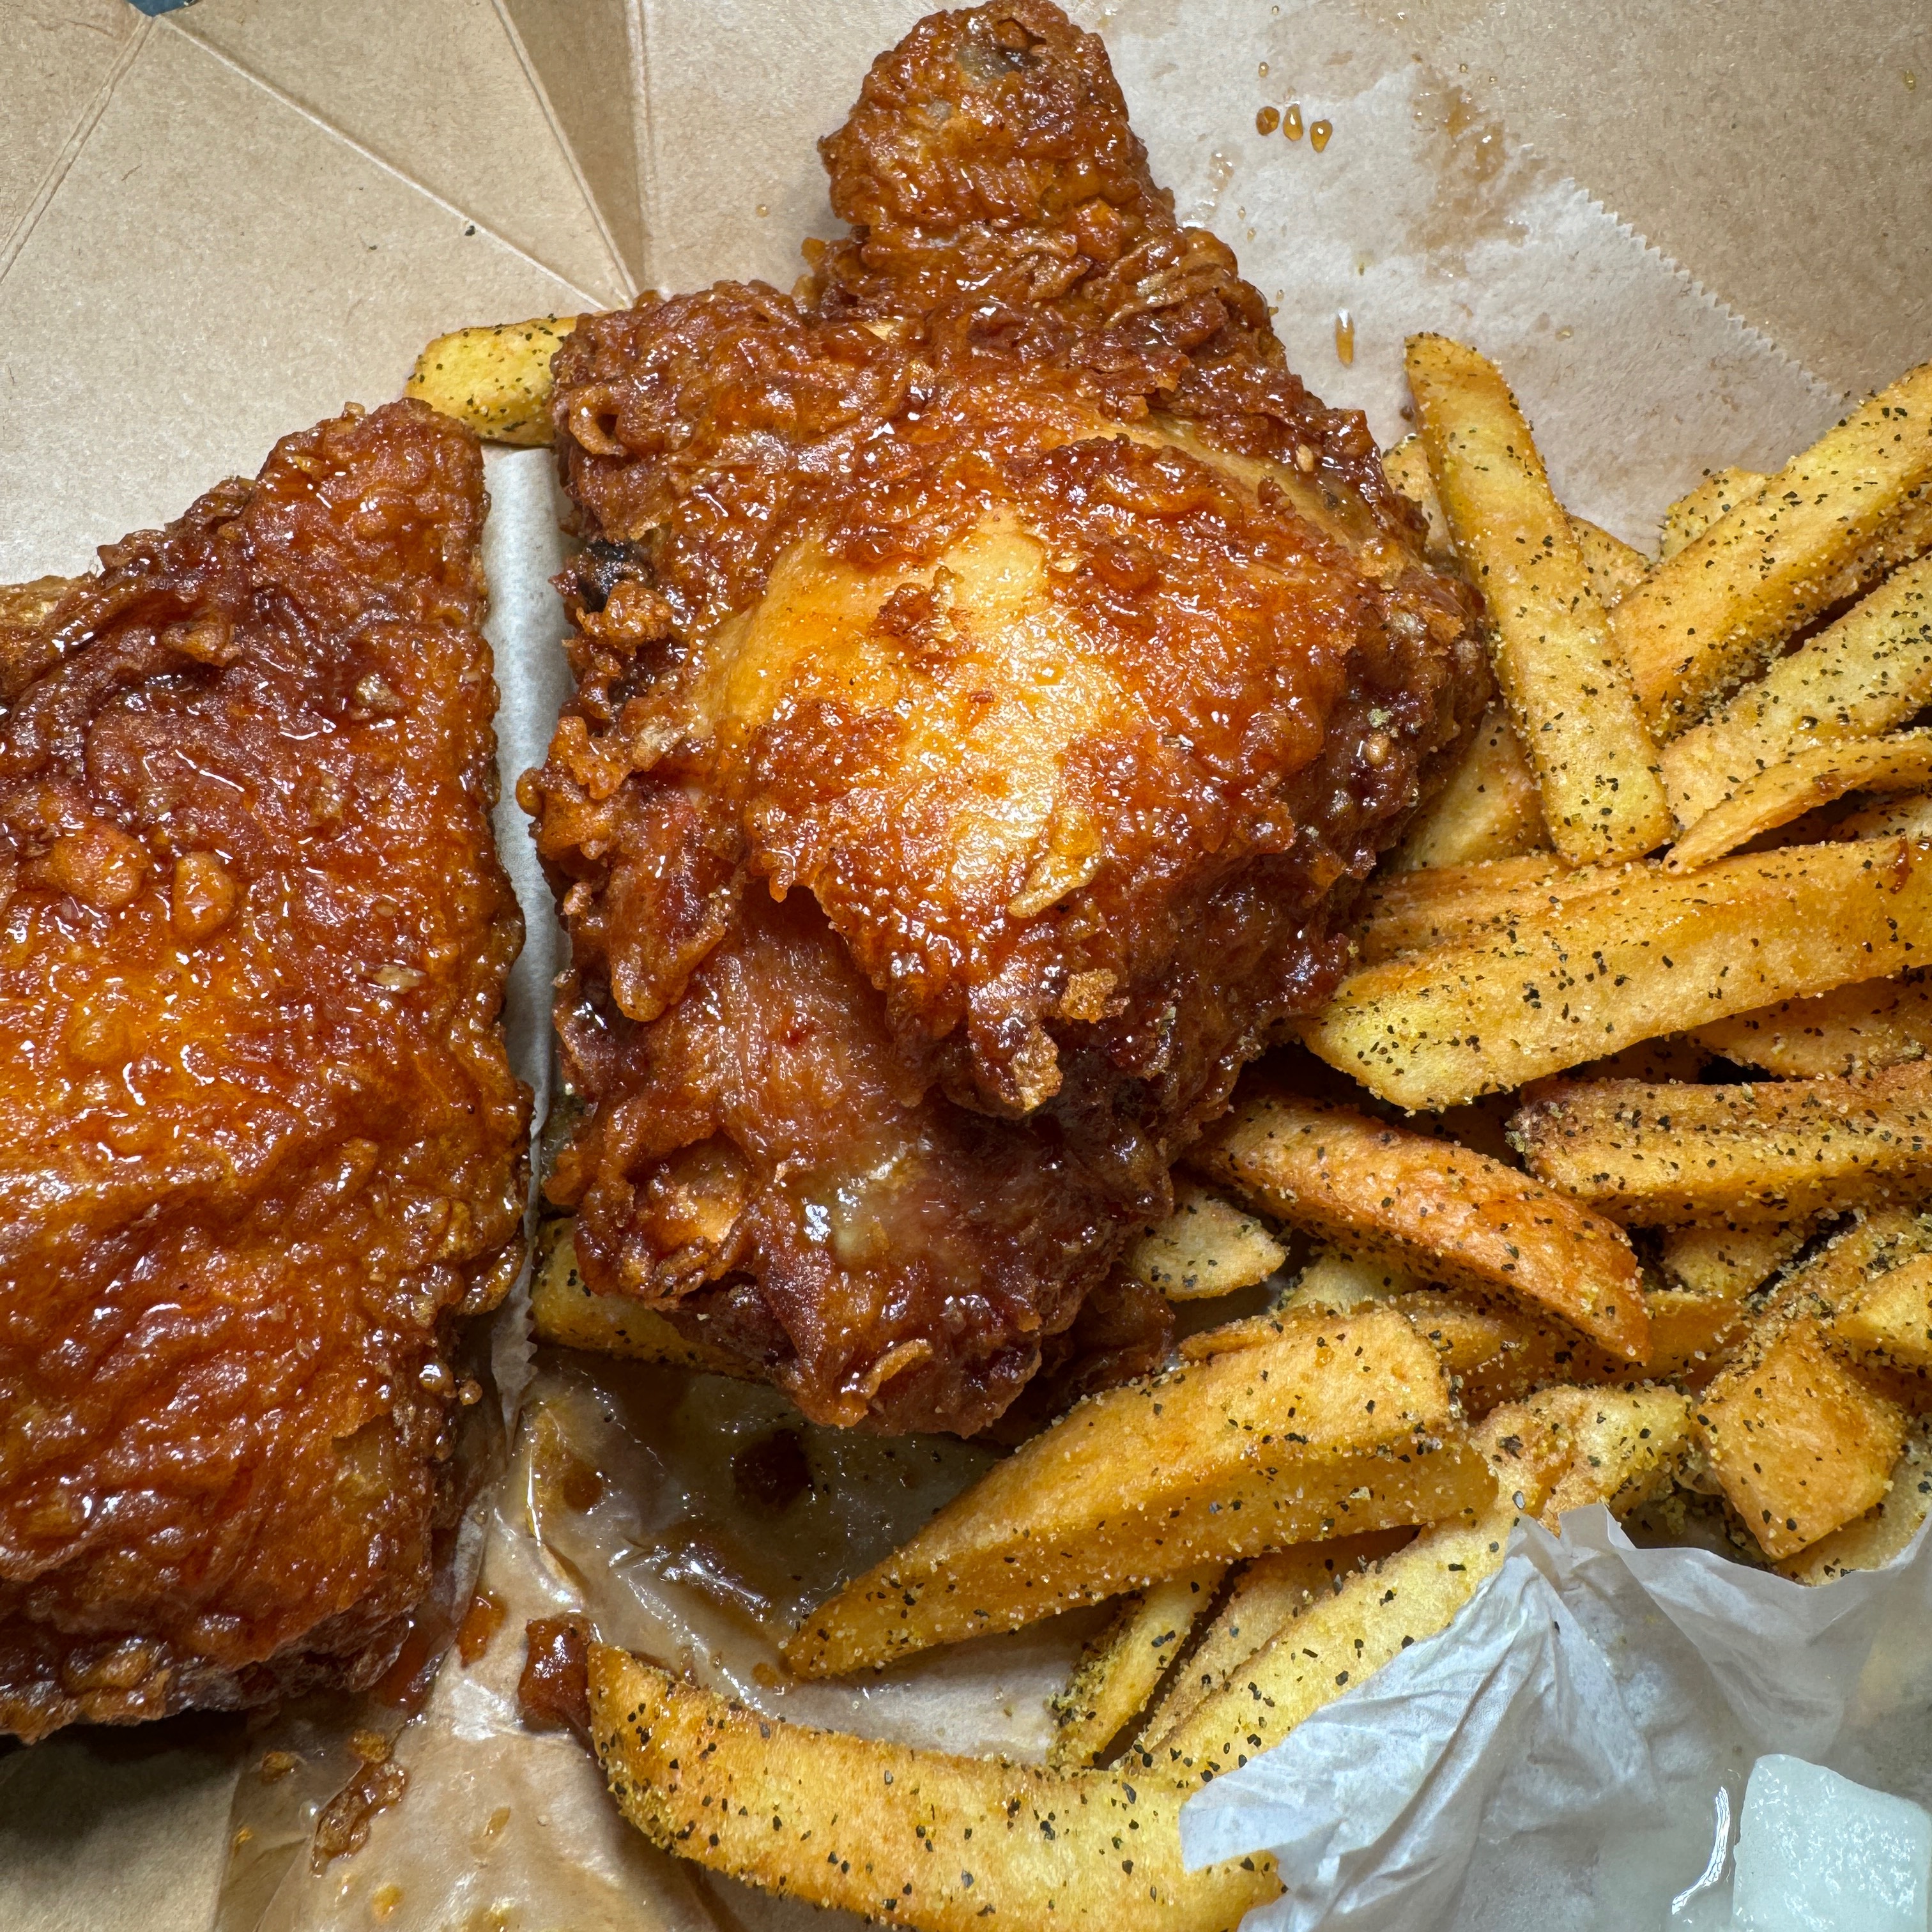 3 Pc Thigh & Leg With Fries $14 from Honey Dress Fried Chicken on #foodmento http://foodmento.com/dish/57613